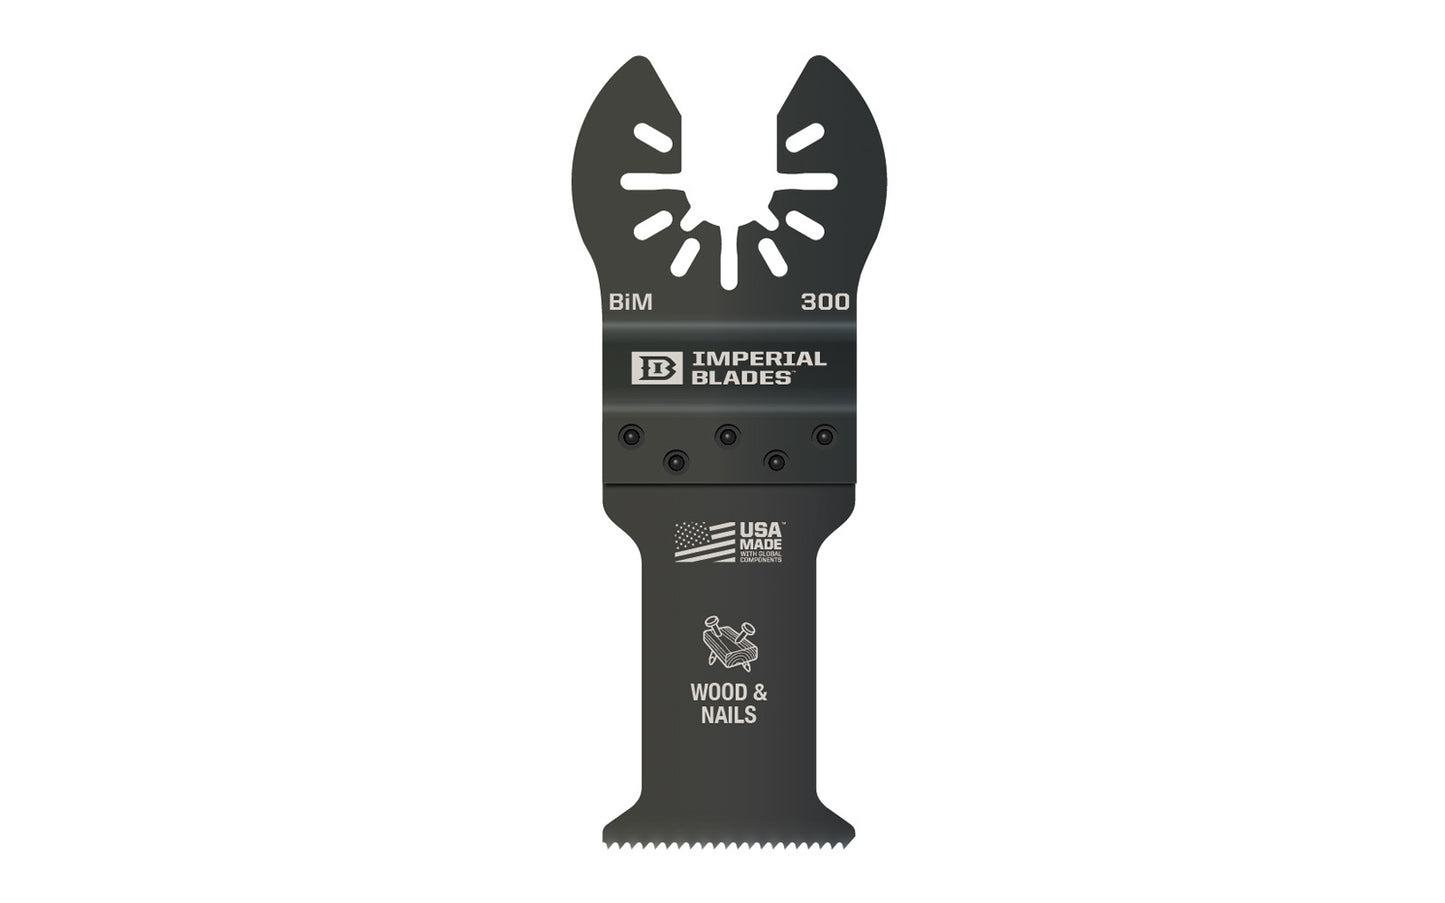 Imperial Blades "One Fit" 1-1/4" Standard Wood & Nails Blade 1 PC is a Bimetal blade with teeth set for Wood & Nails, Copper Pipe, Wood, PVC, Drywall. Blade Width: 1-1/4" (32 mm). Blade Depth: 1-5/8" (41 mm). Standard Wood & Nails Blade - BiM blade. Model No. IBOA300-1. 819846010247. BiM blade